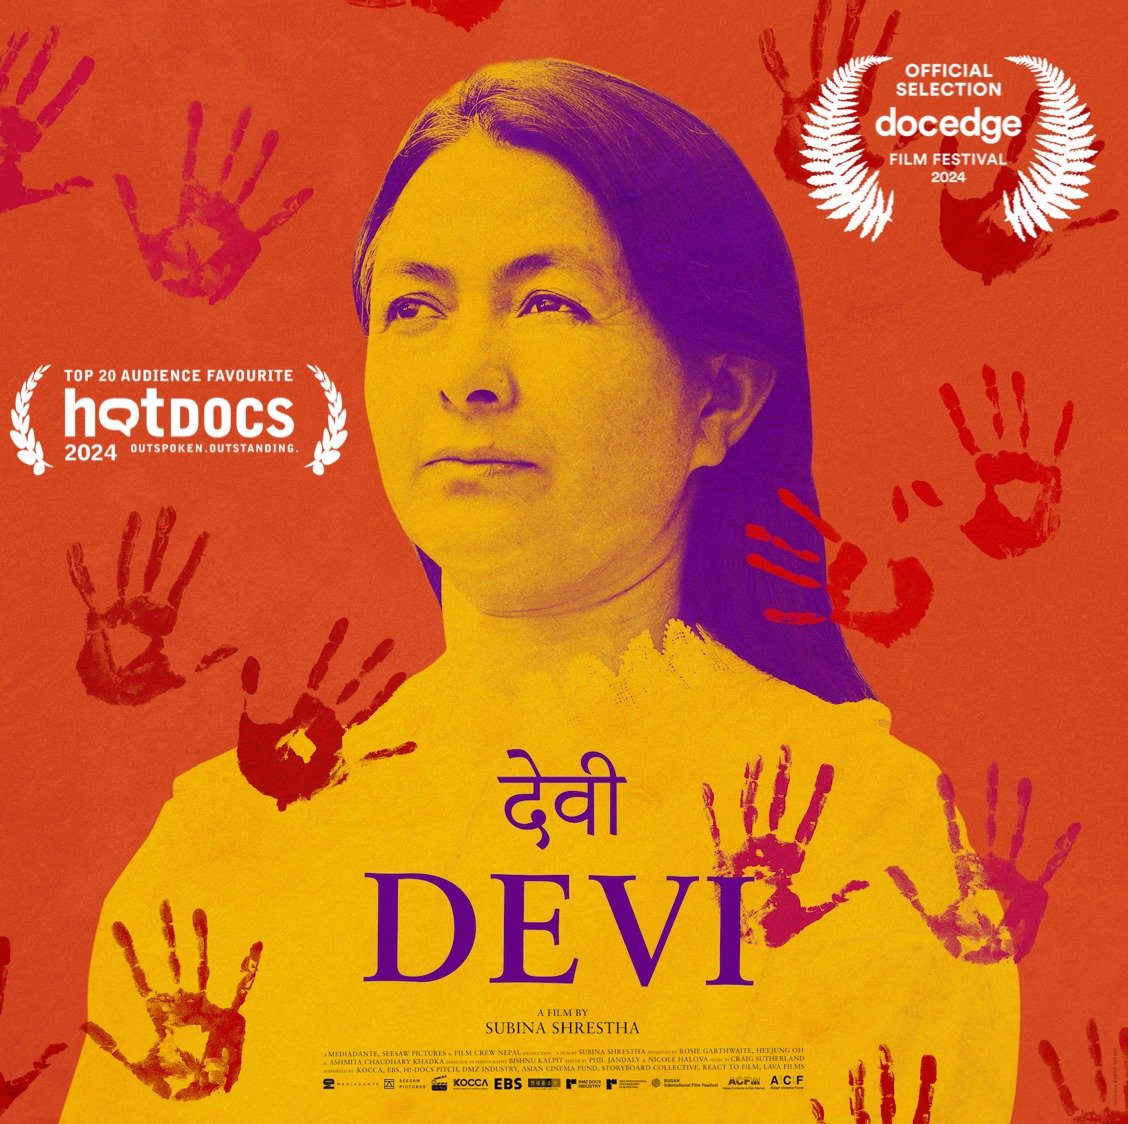 &quot;The film may serve as a global call for this mission even though it directs its focus on this one story. Devi&rsquo;s tale is powerful and profound for those both in her own country and around the world.&quot; 

https://povmagazine.com/devi-rev